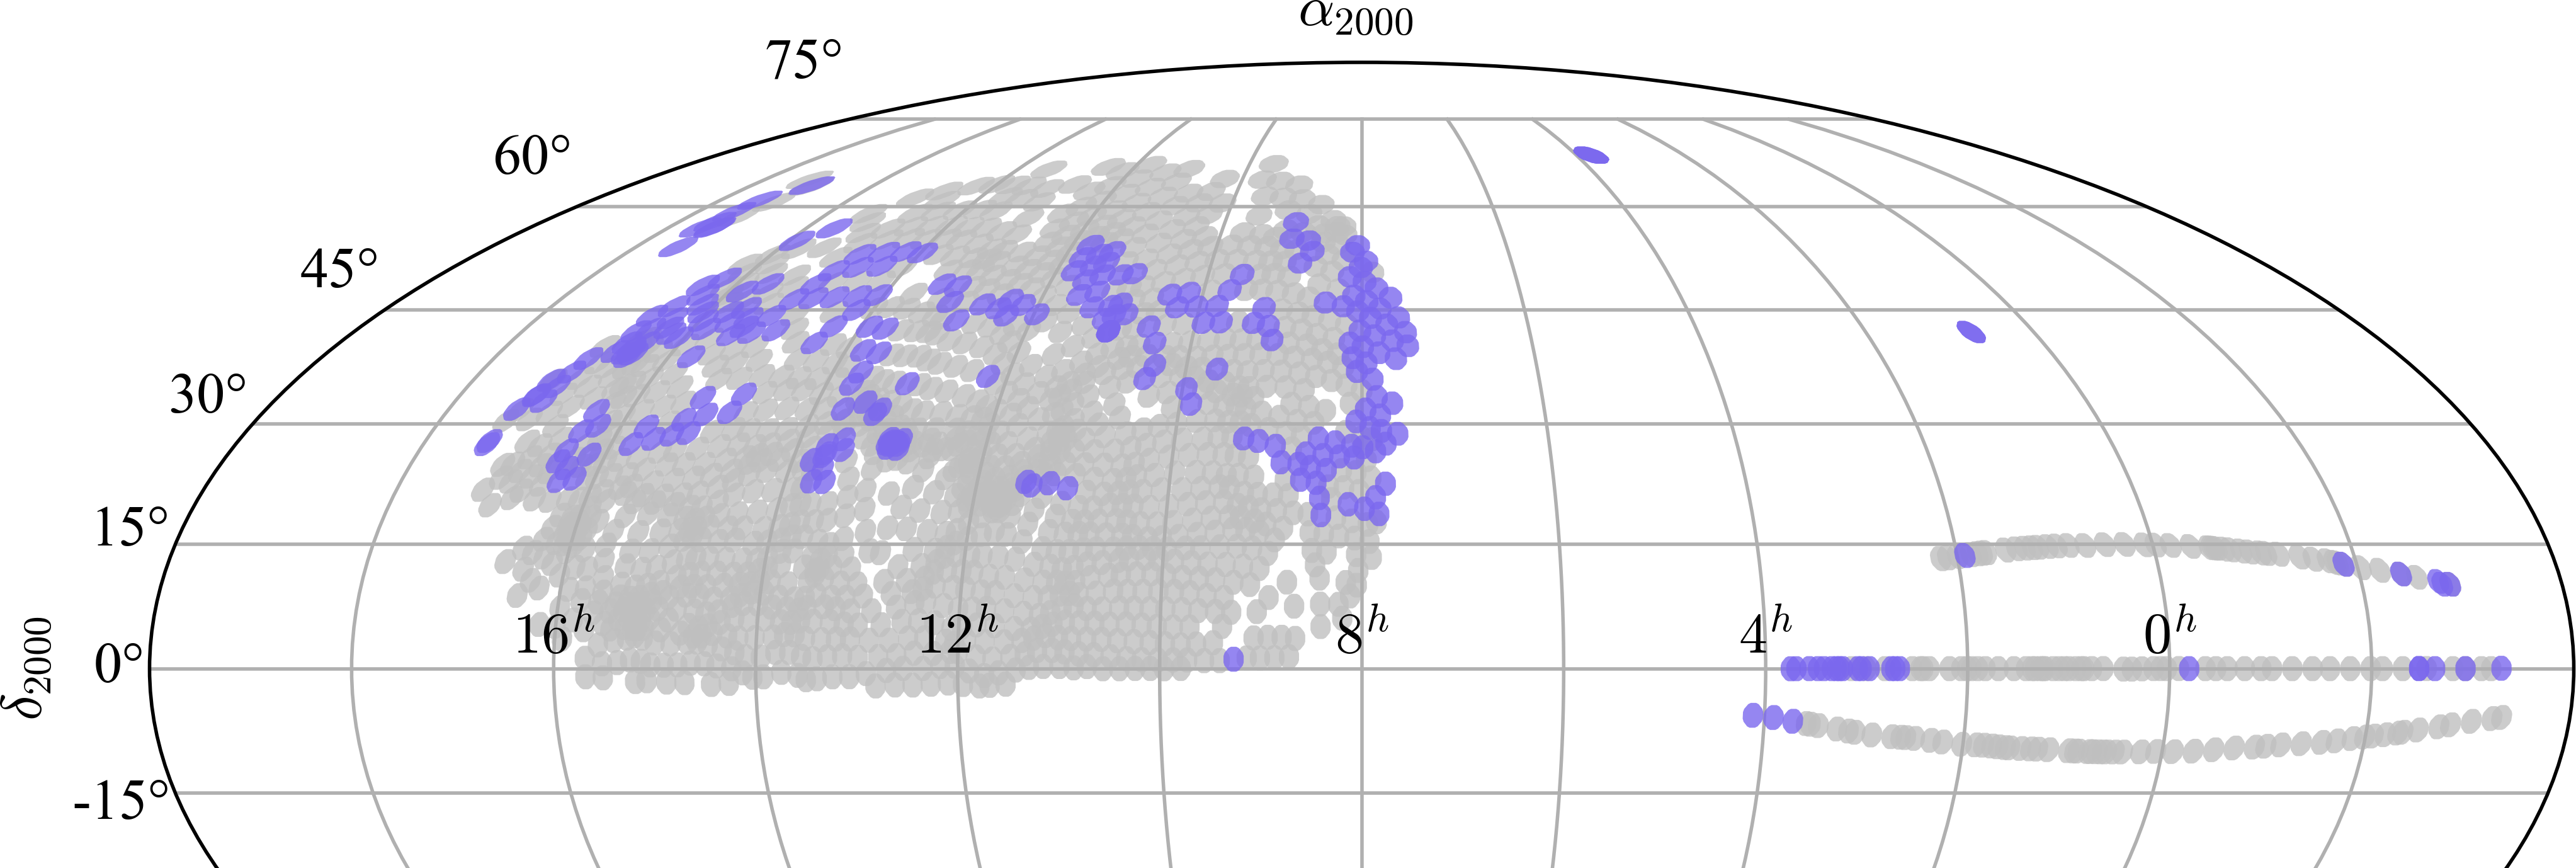 MaNGA coverage area for DR16 (click to enlarge). Grey shows potential fields (tiles), while blue shows the observed plates included in DR16.